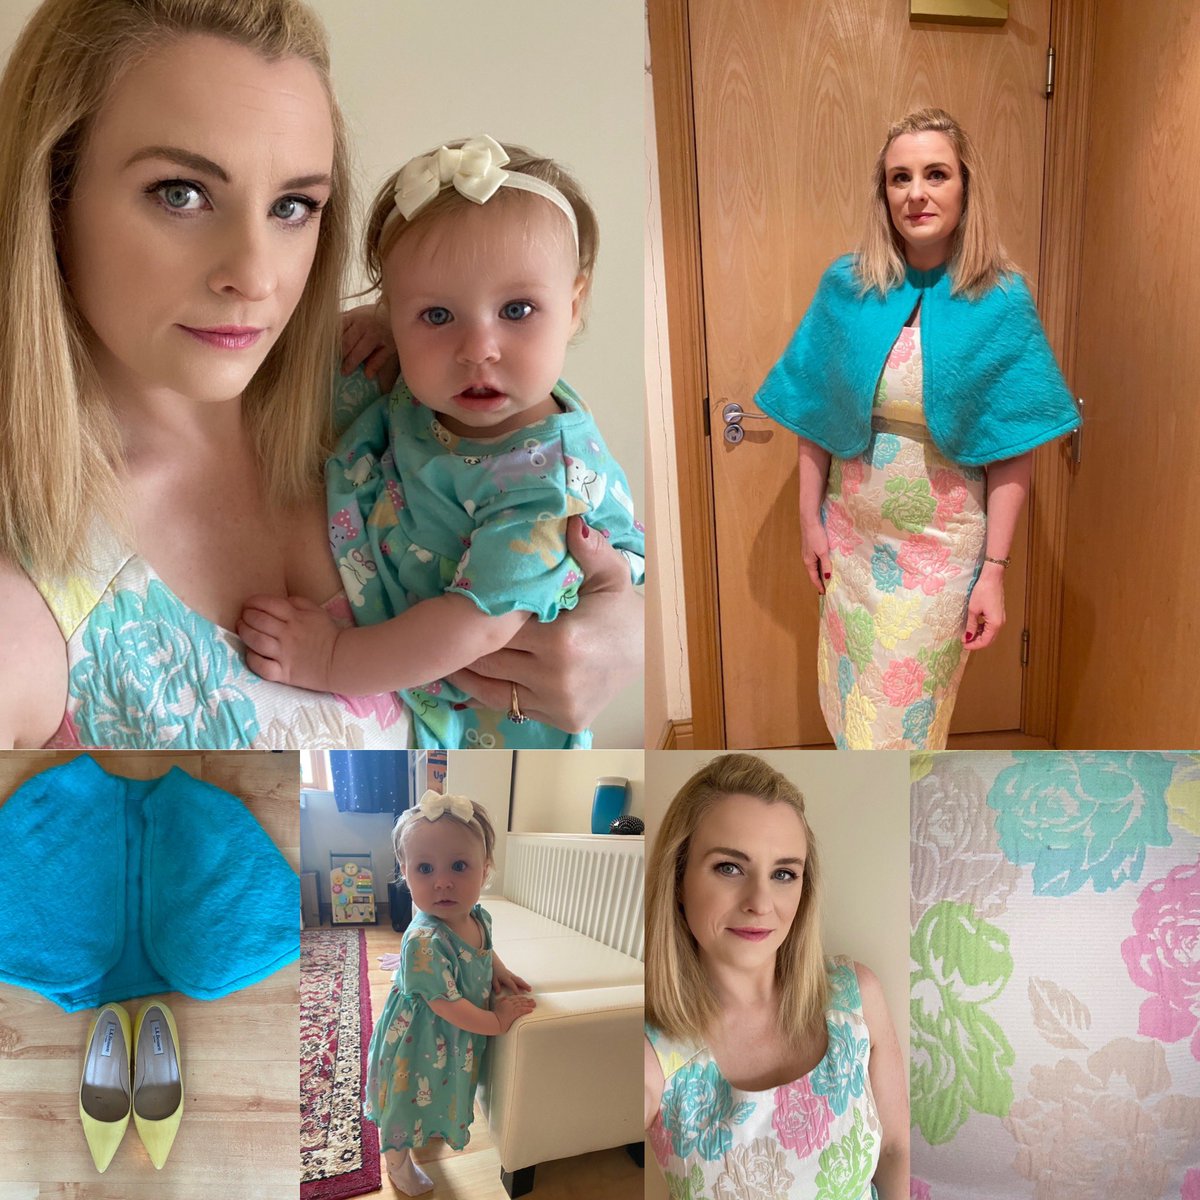 Pastels for summer in this week’s #sundaystyle with a brocade dress, mohair vintage cape and primrose #lkbennett kitten heels. All tied together with freshly straightened hair and an adorable mini-me with a bow on top! #soprano #mama #pastels #SummerStyle